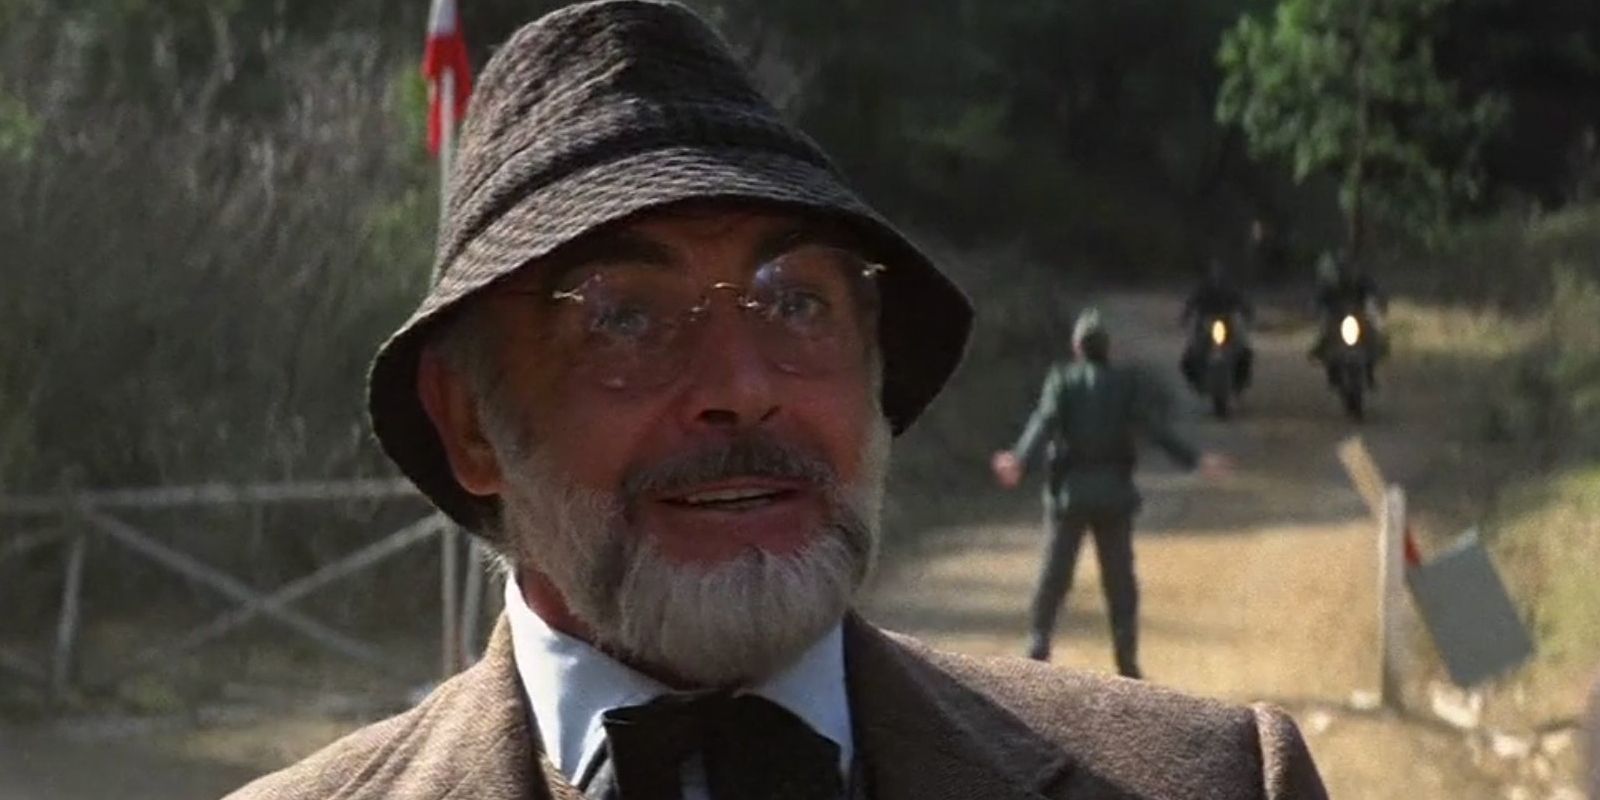 Sean Connery in The Last Crusade in a car smiling